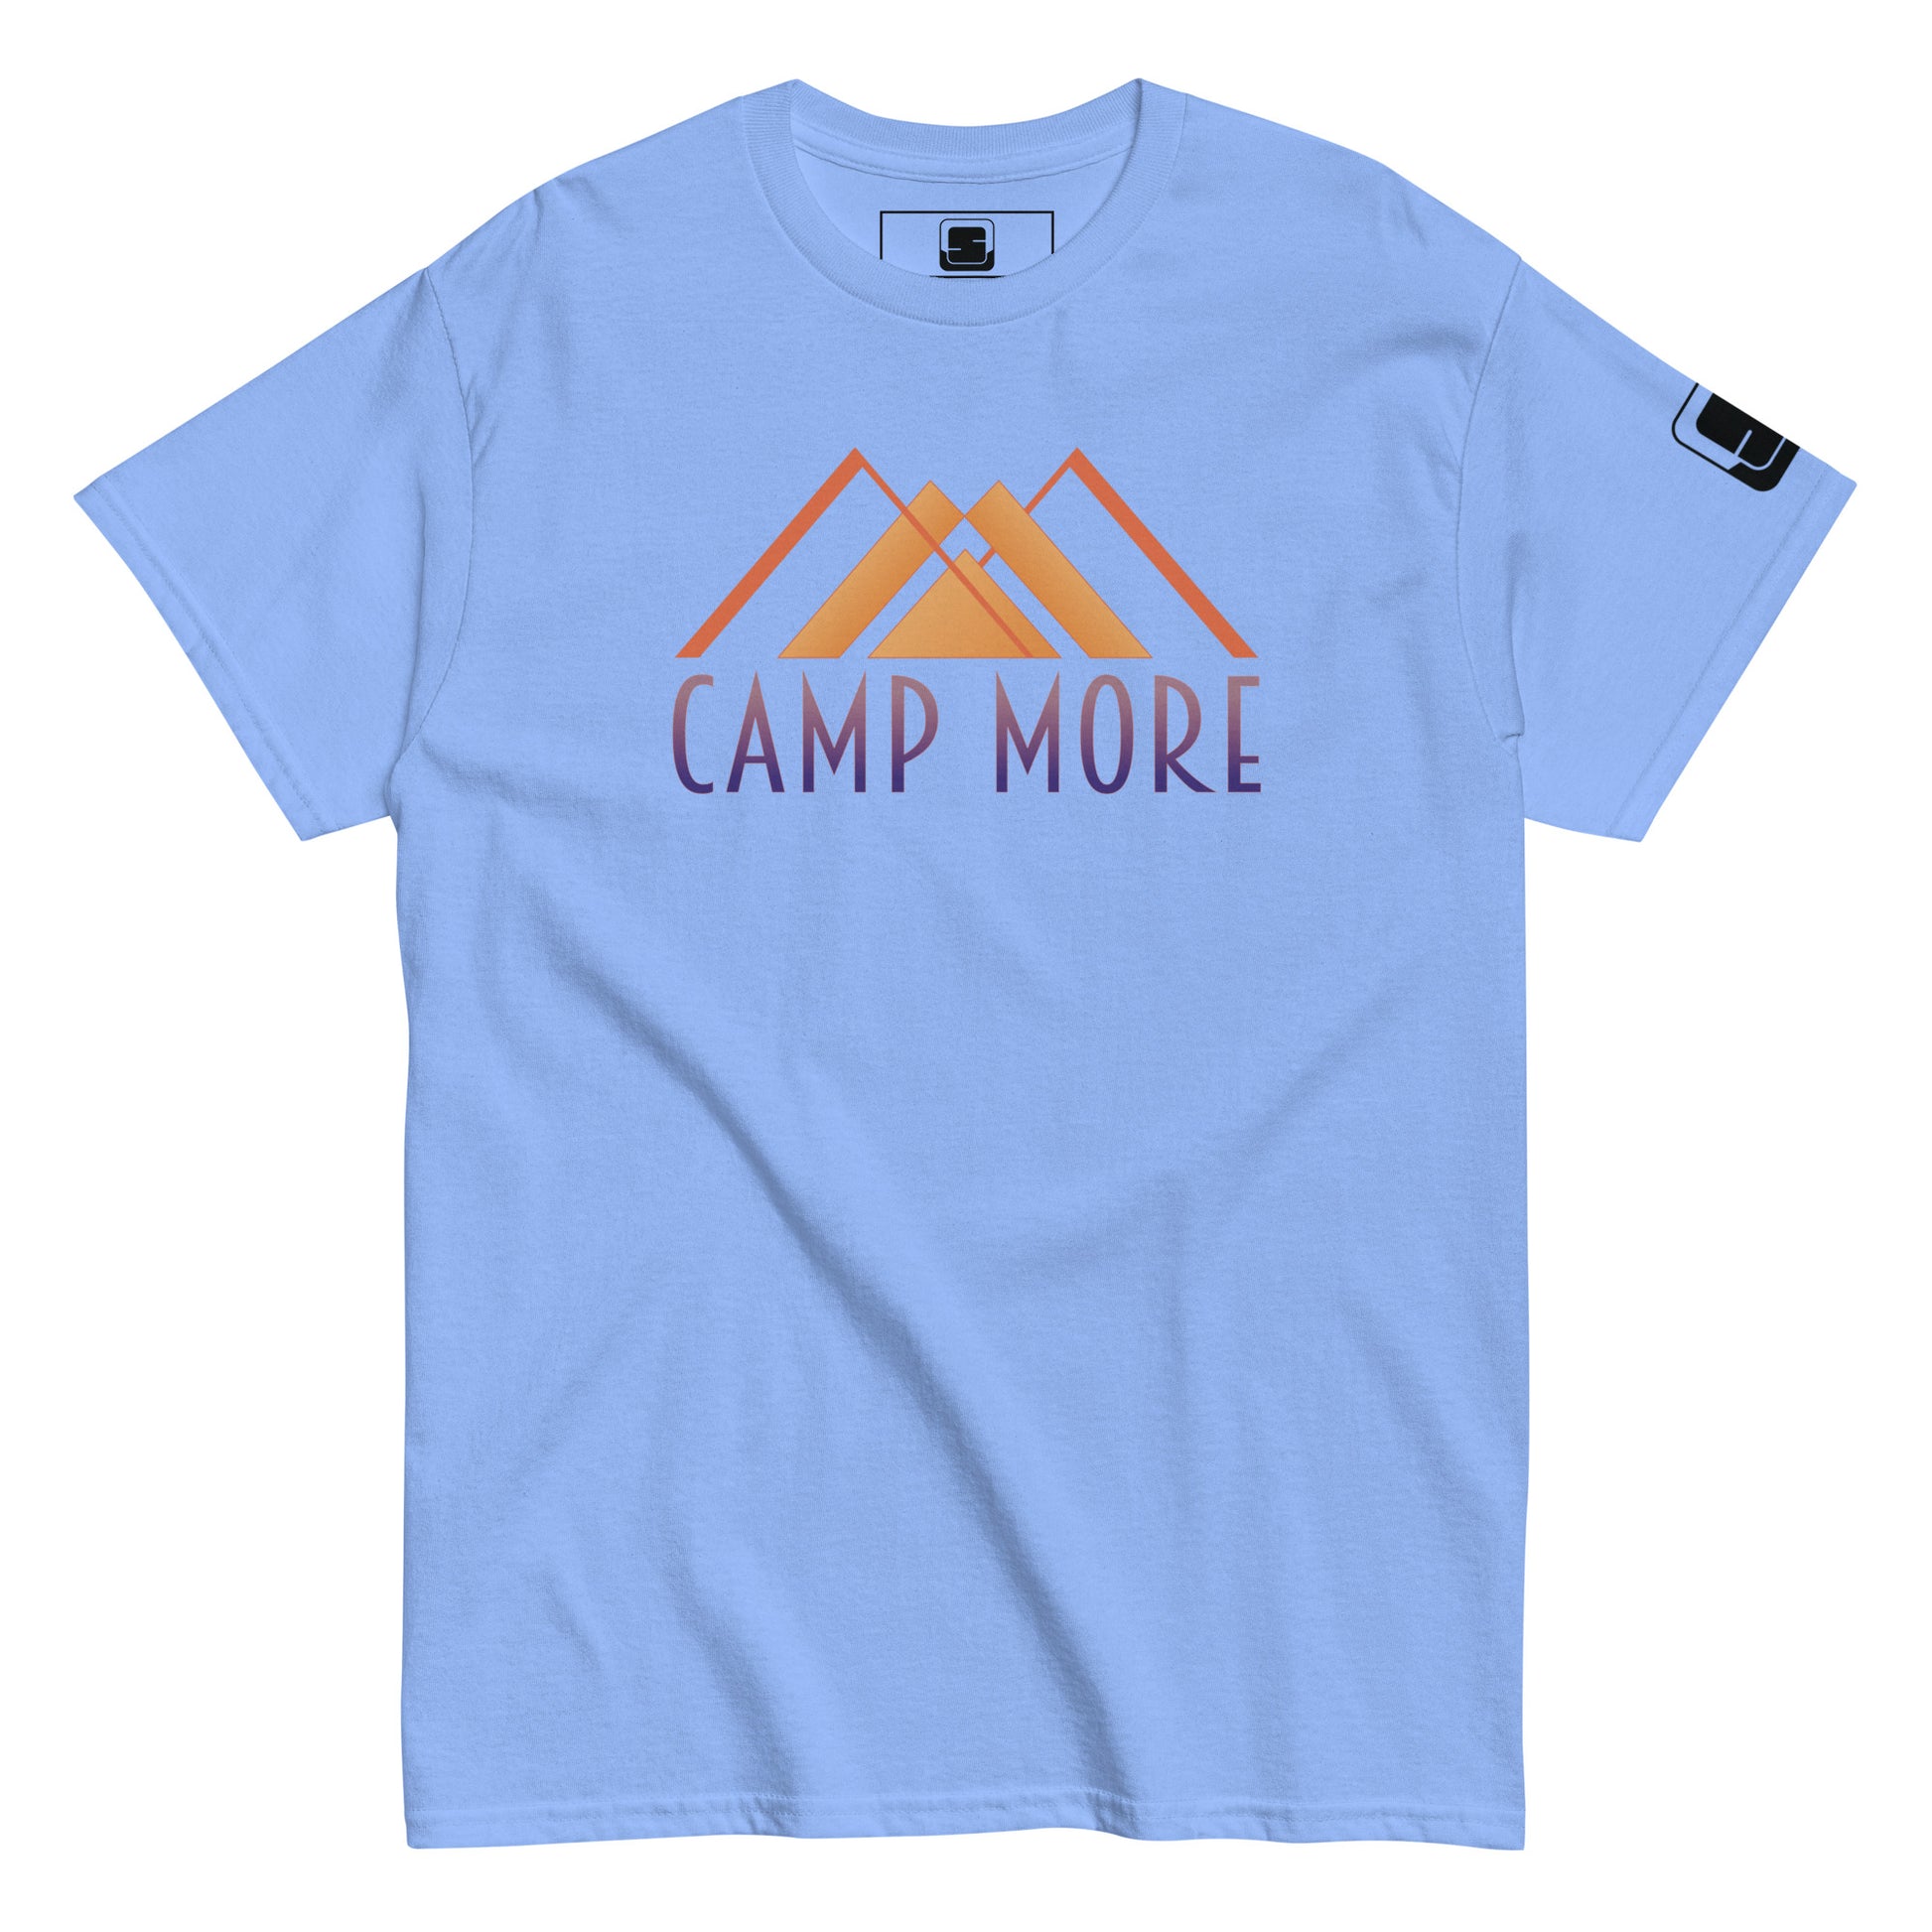 Carolina Blue t-shirt showcasing the 'CAMP MORE' phrase in purple with an orange mountain range illustration, complete with a black logo patch on the sleeve, isolated on a white background.